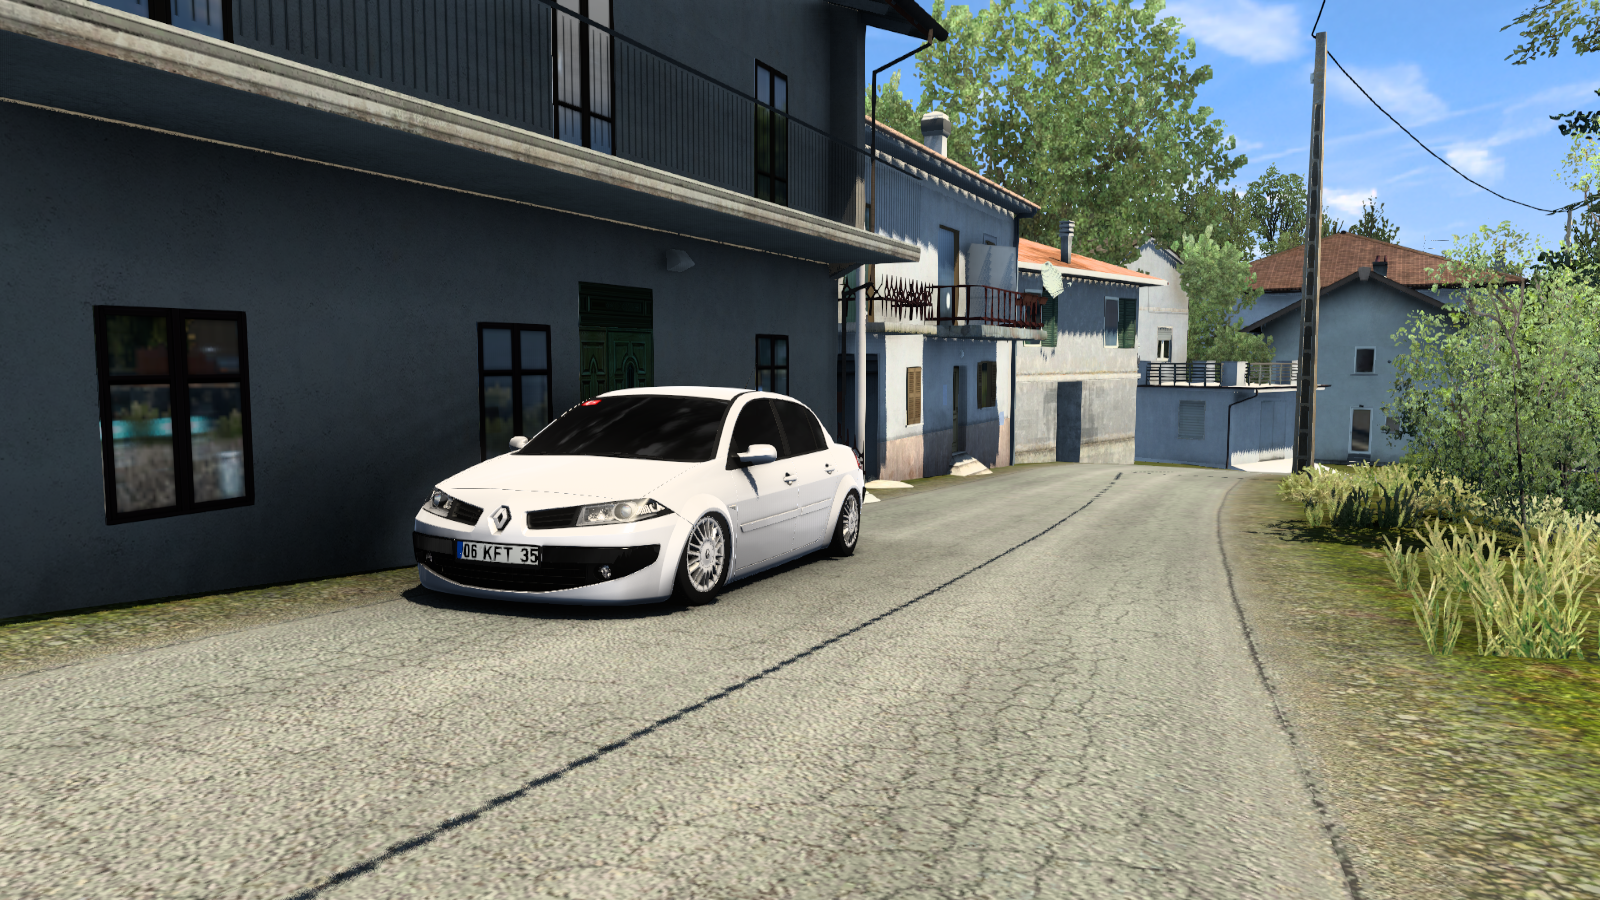 ets2_20210326_103102_00.png